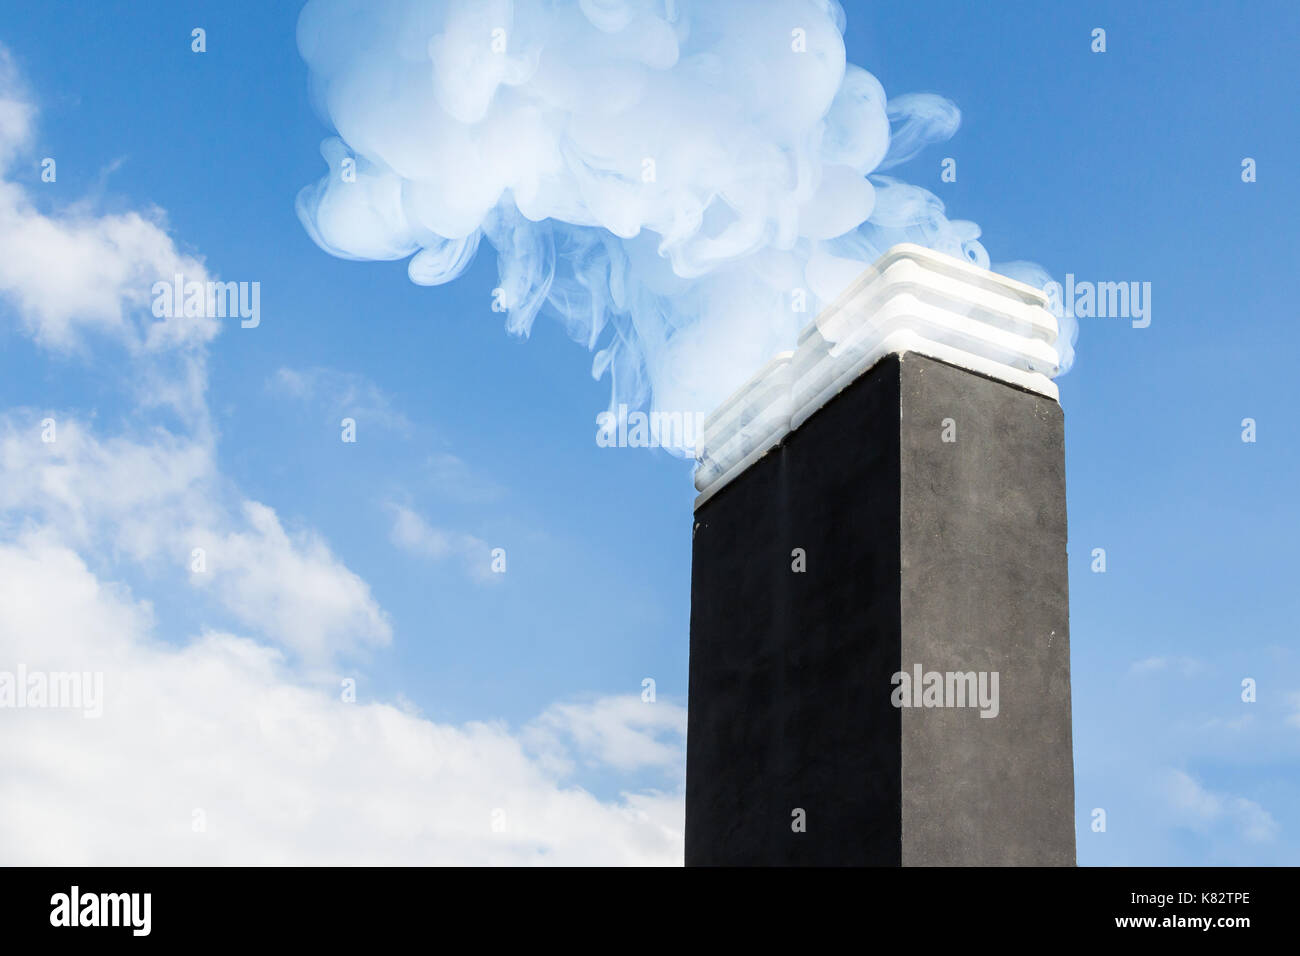 Smoke raising from a chimney in winter day against blue sky Stock Photo